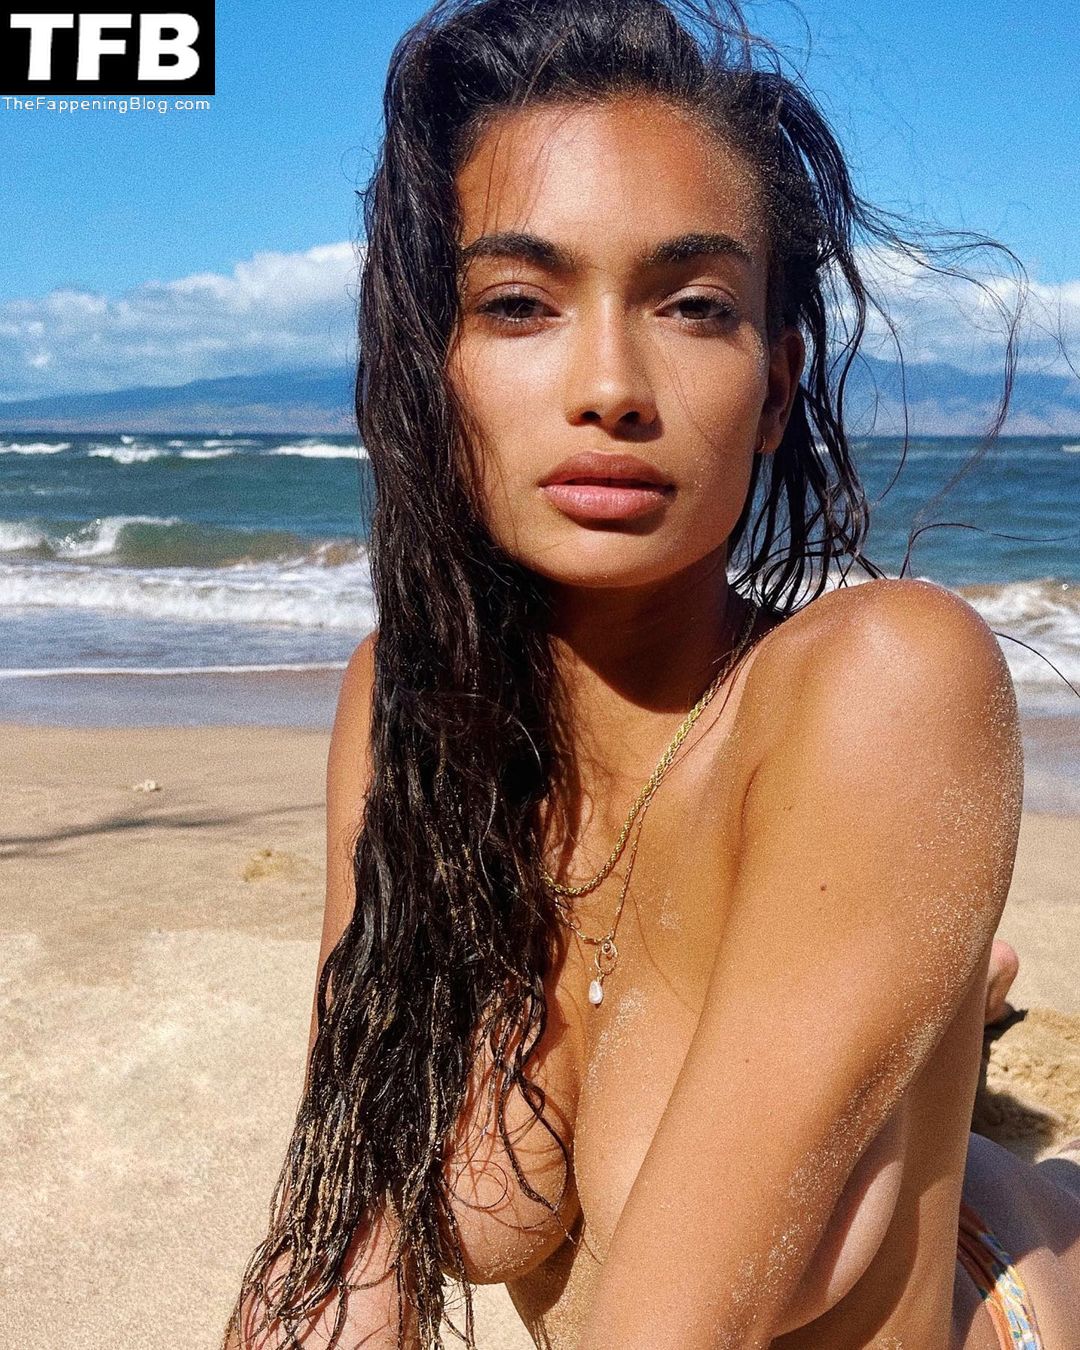 Kelly-Gale-Topless-The-Fappening-Blog-2.jpg